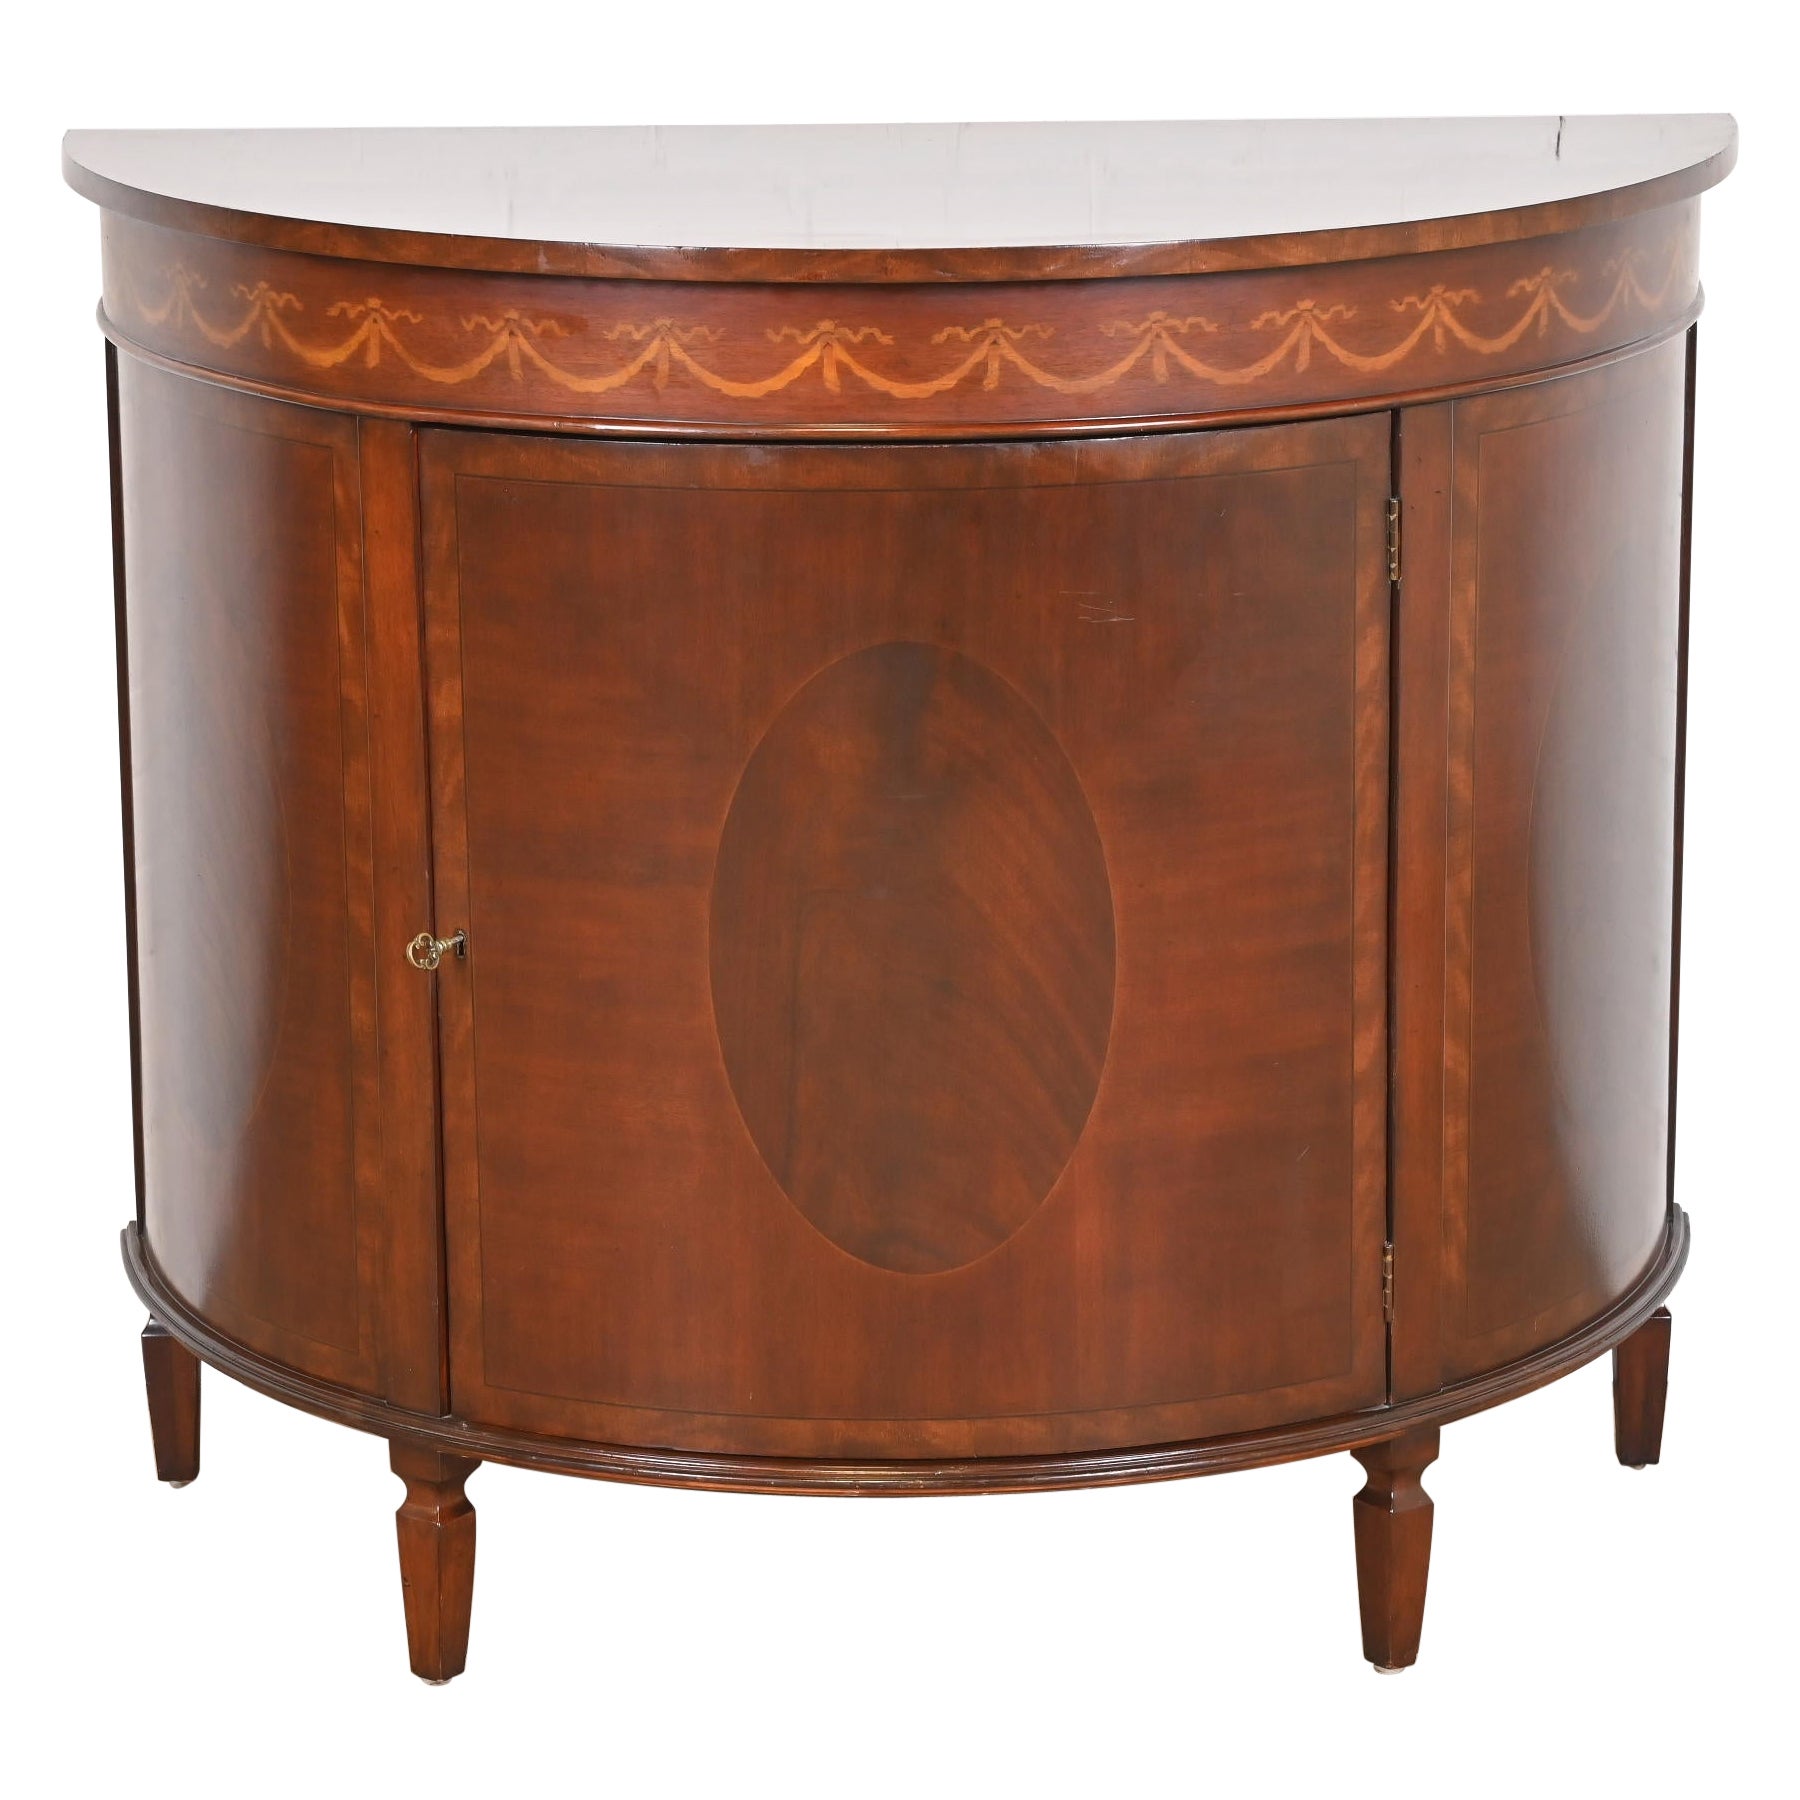 Georgian Inlaid Mahogany Demilune Cabinet in the Manner of Baker Furniture